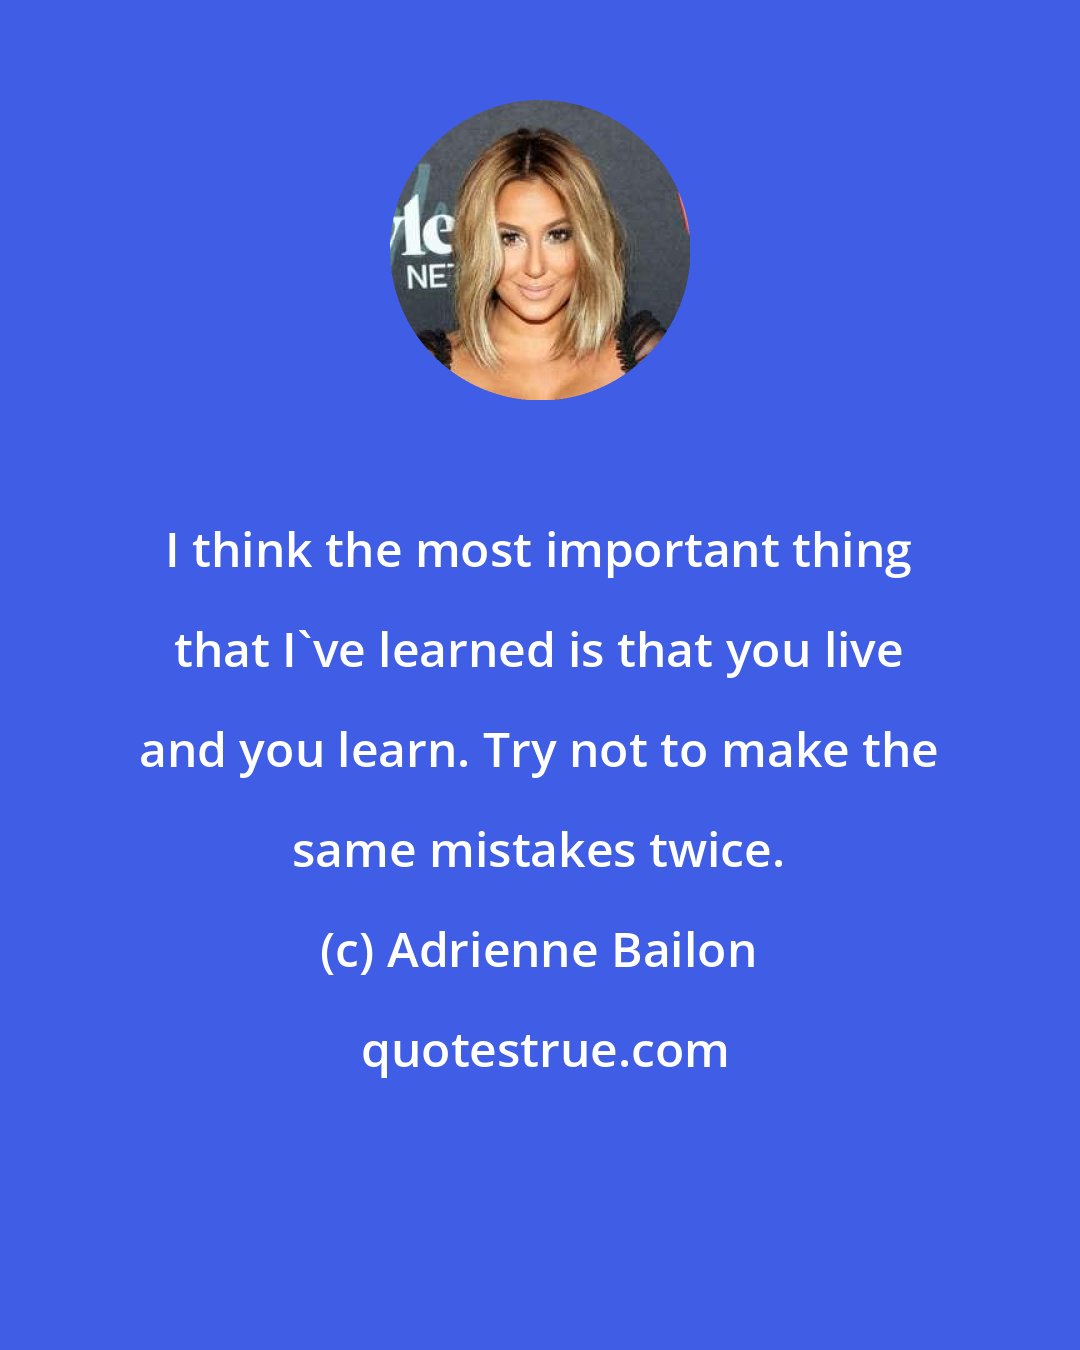 Adrienne Bailon: I think the most important thing that I've learned is that you live and you learn. Try not to make the same mistakes twice.